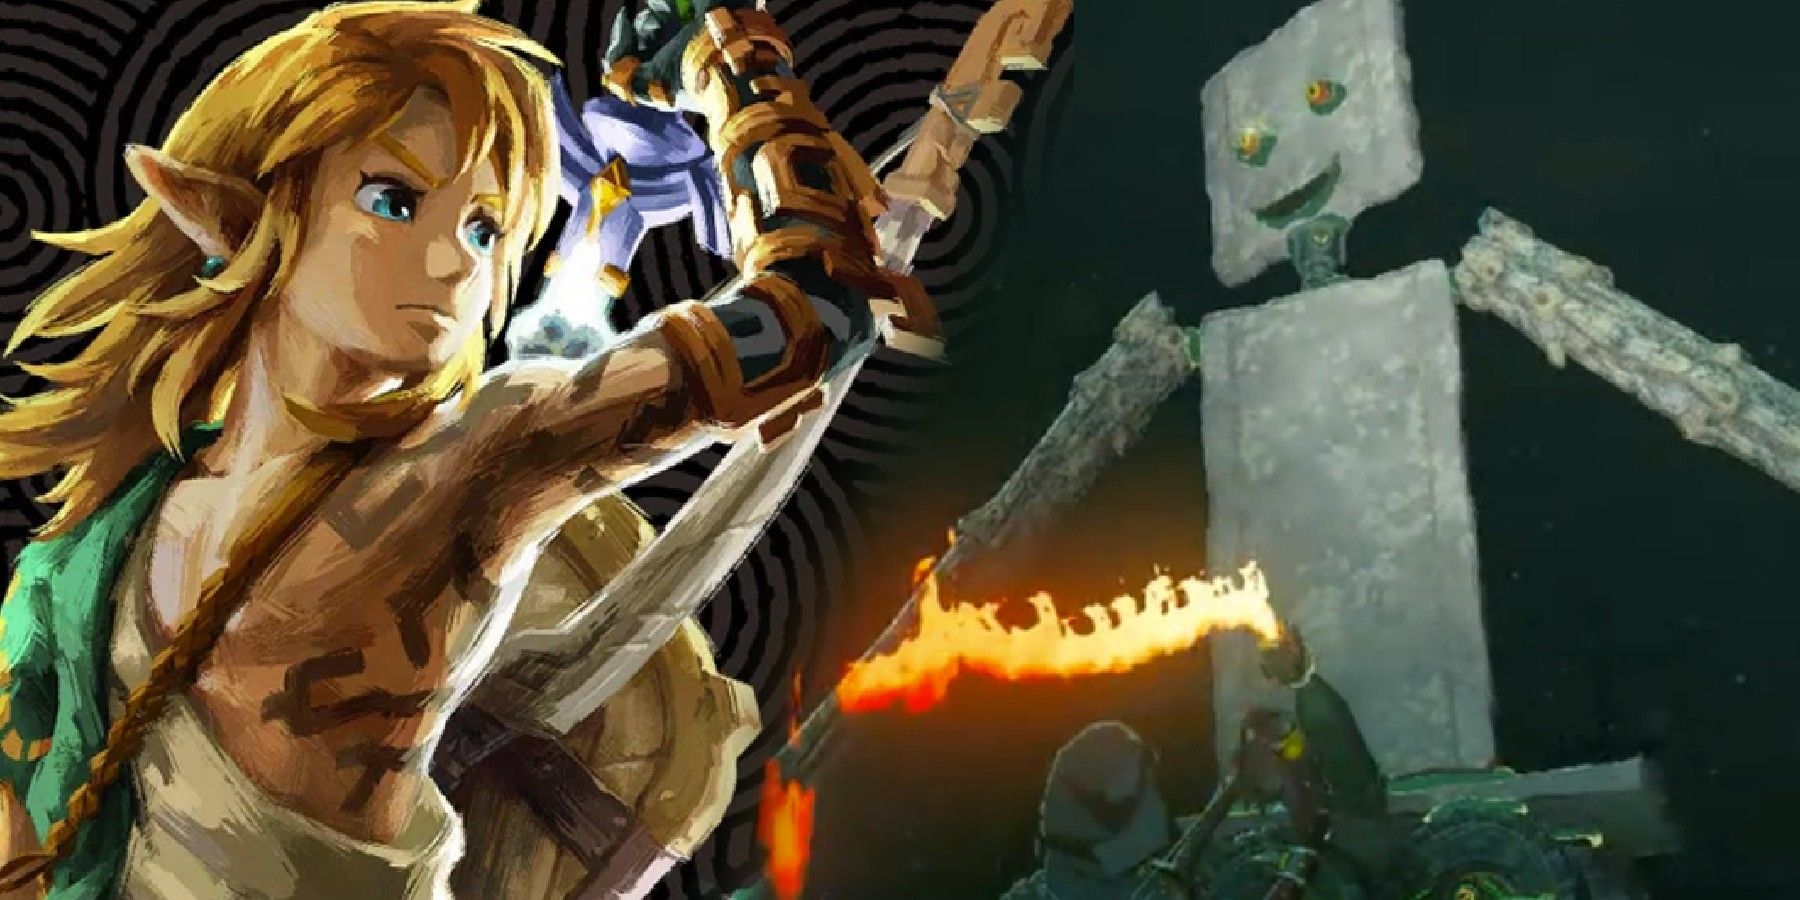 Official art of Link in TOTK, alongside a stone robot with fire shooting out.